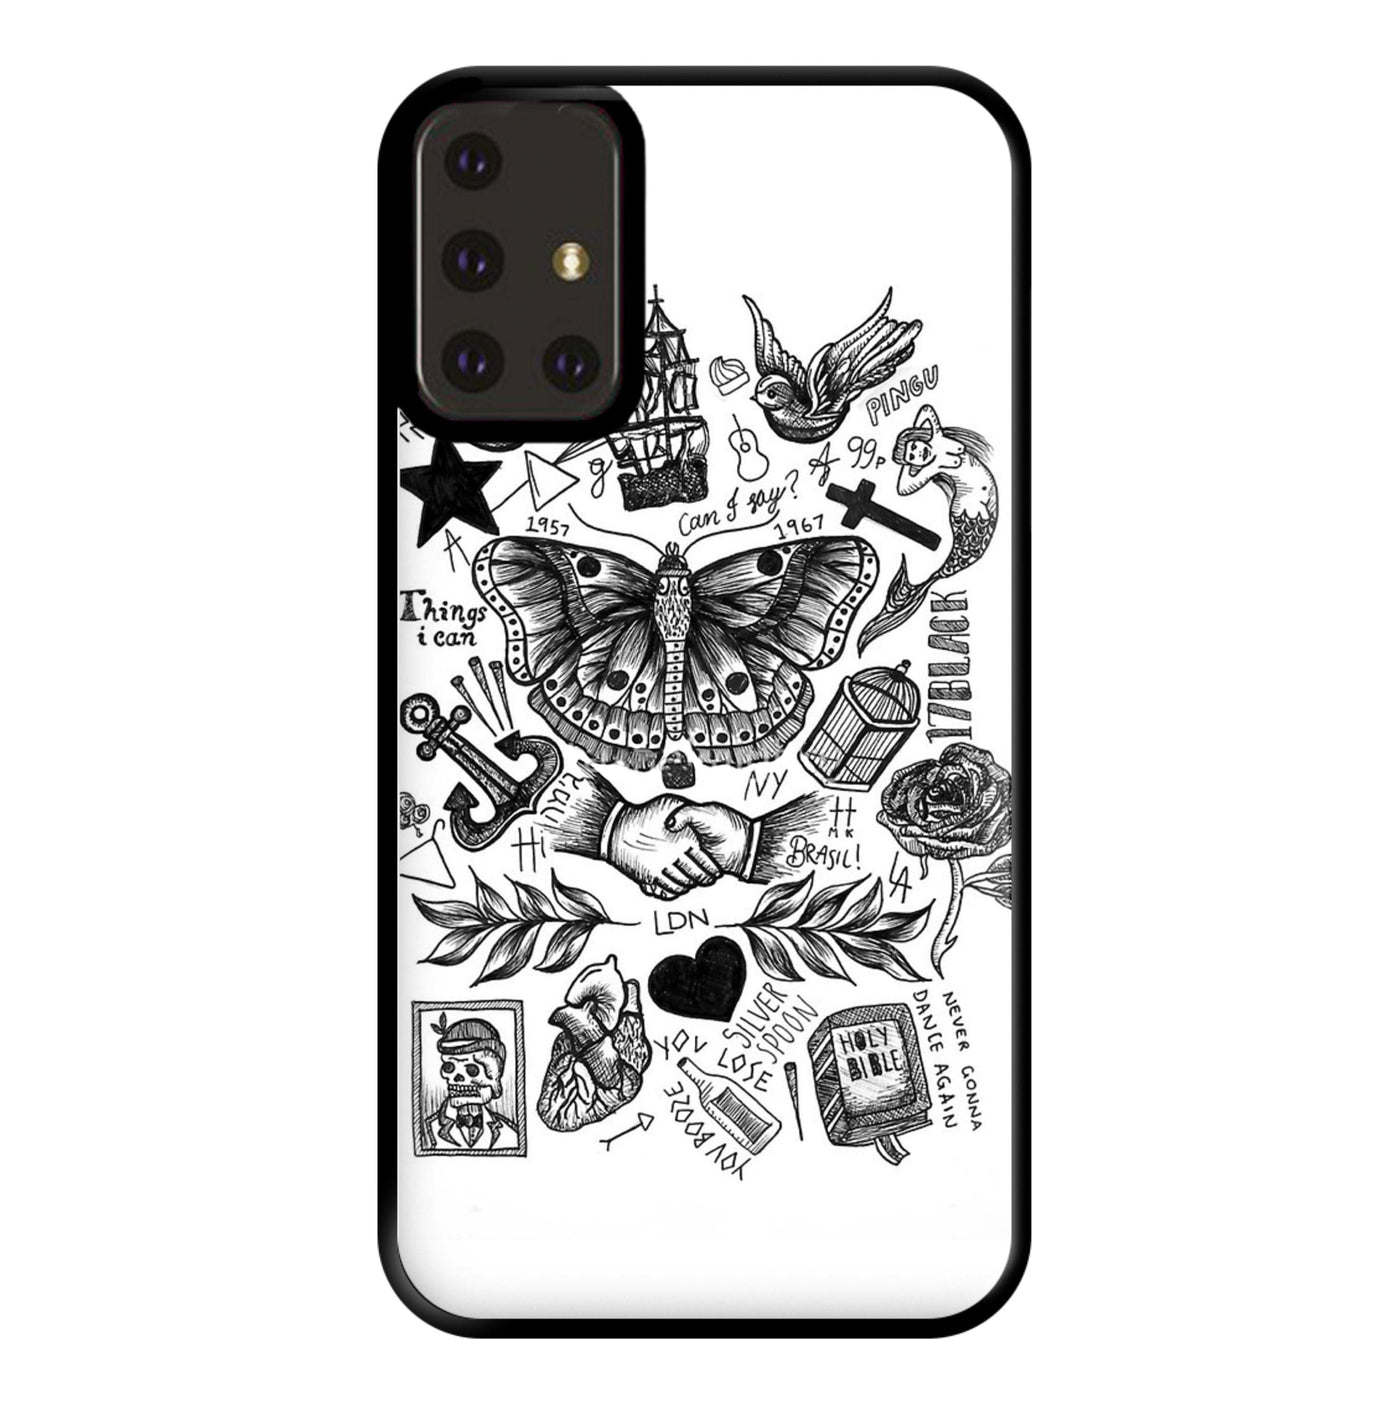 Harry Style's Tattoos Phone Case